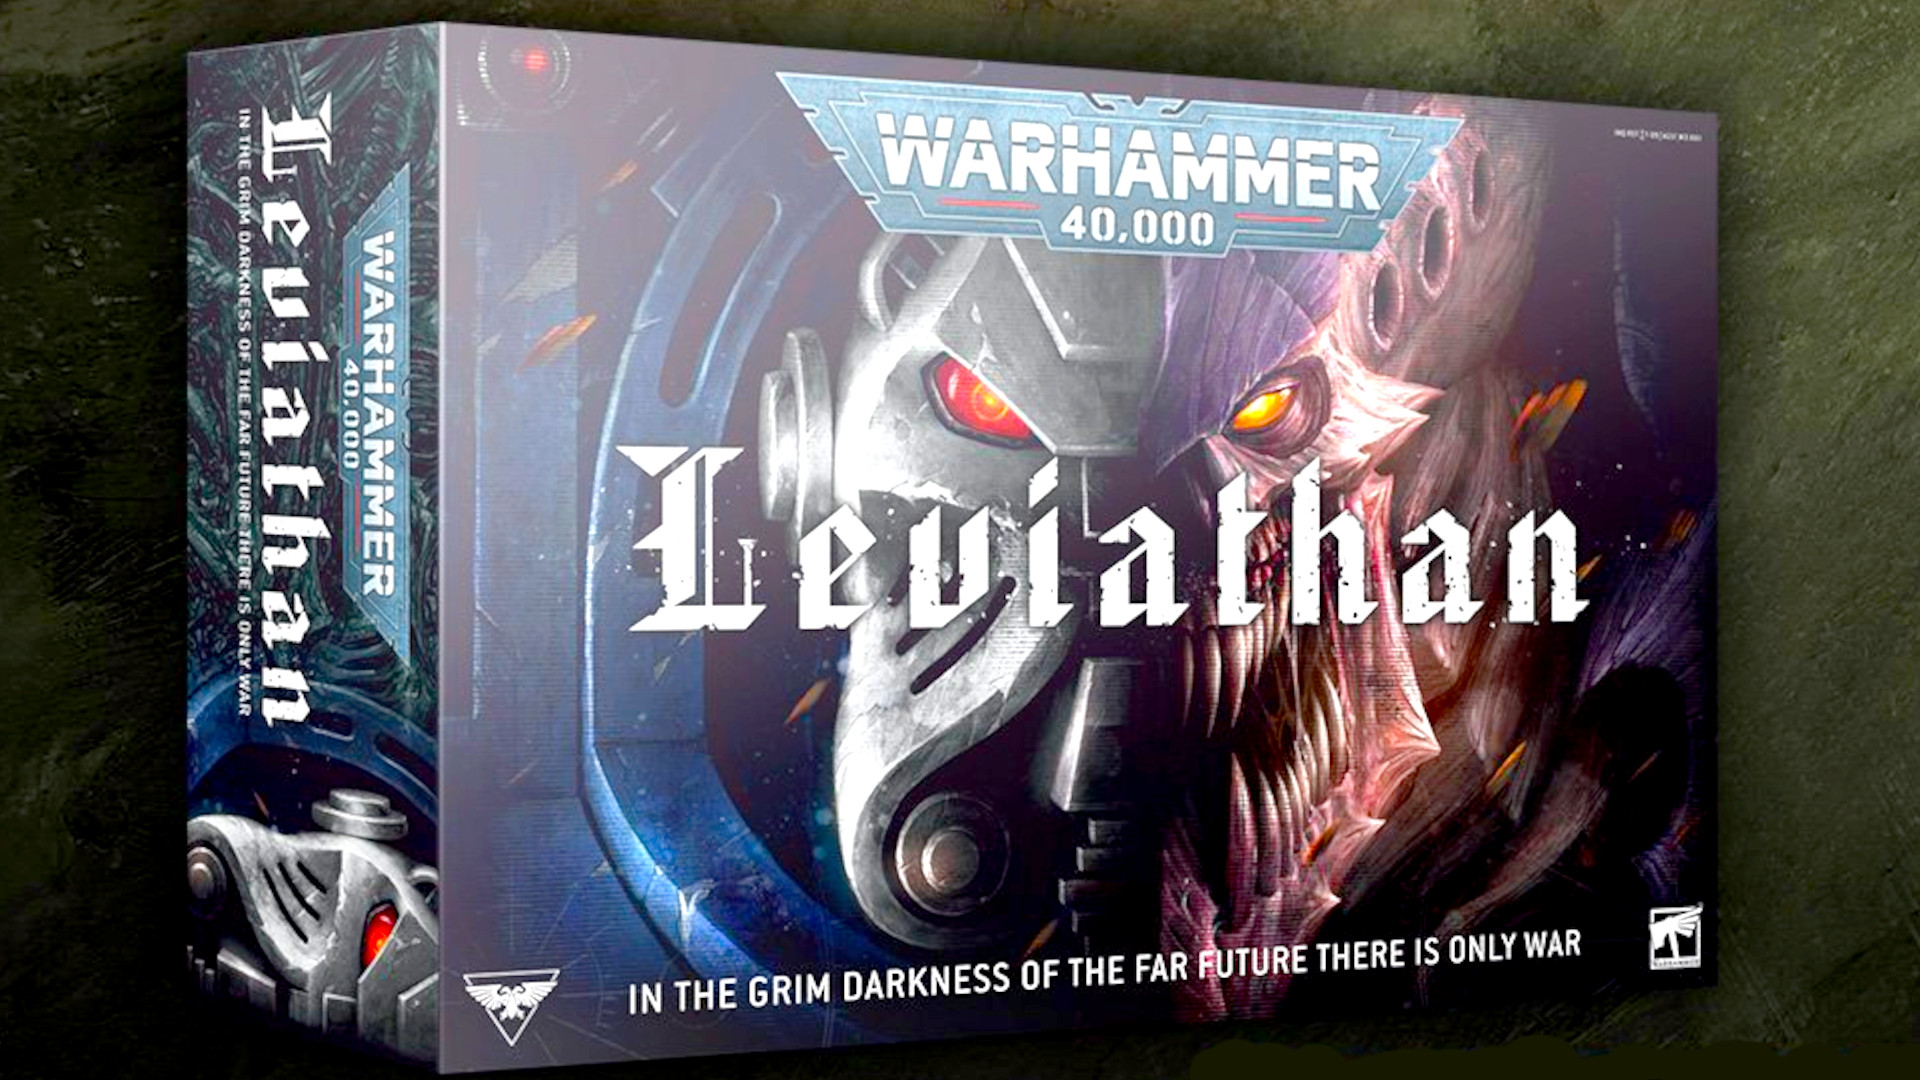 40K Starter Sets Through The Ages - Warhammer Starter Box Review